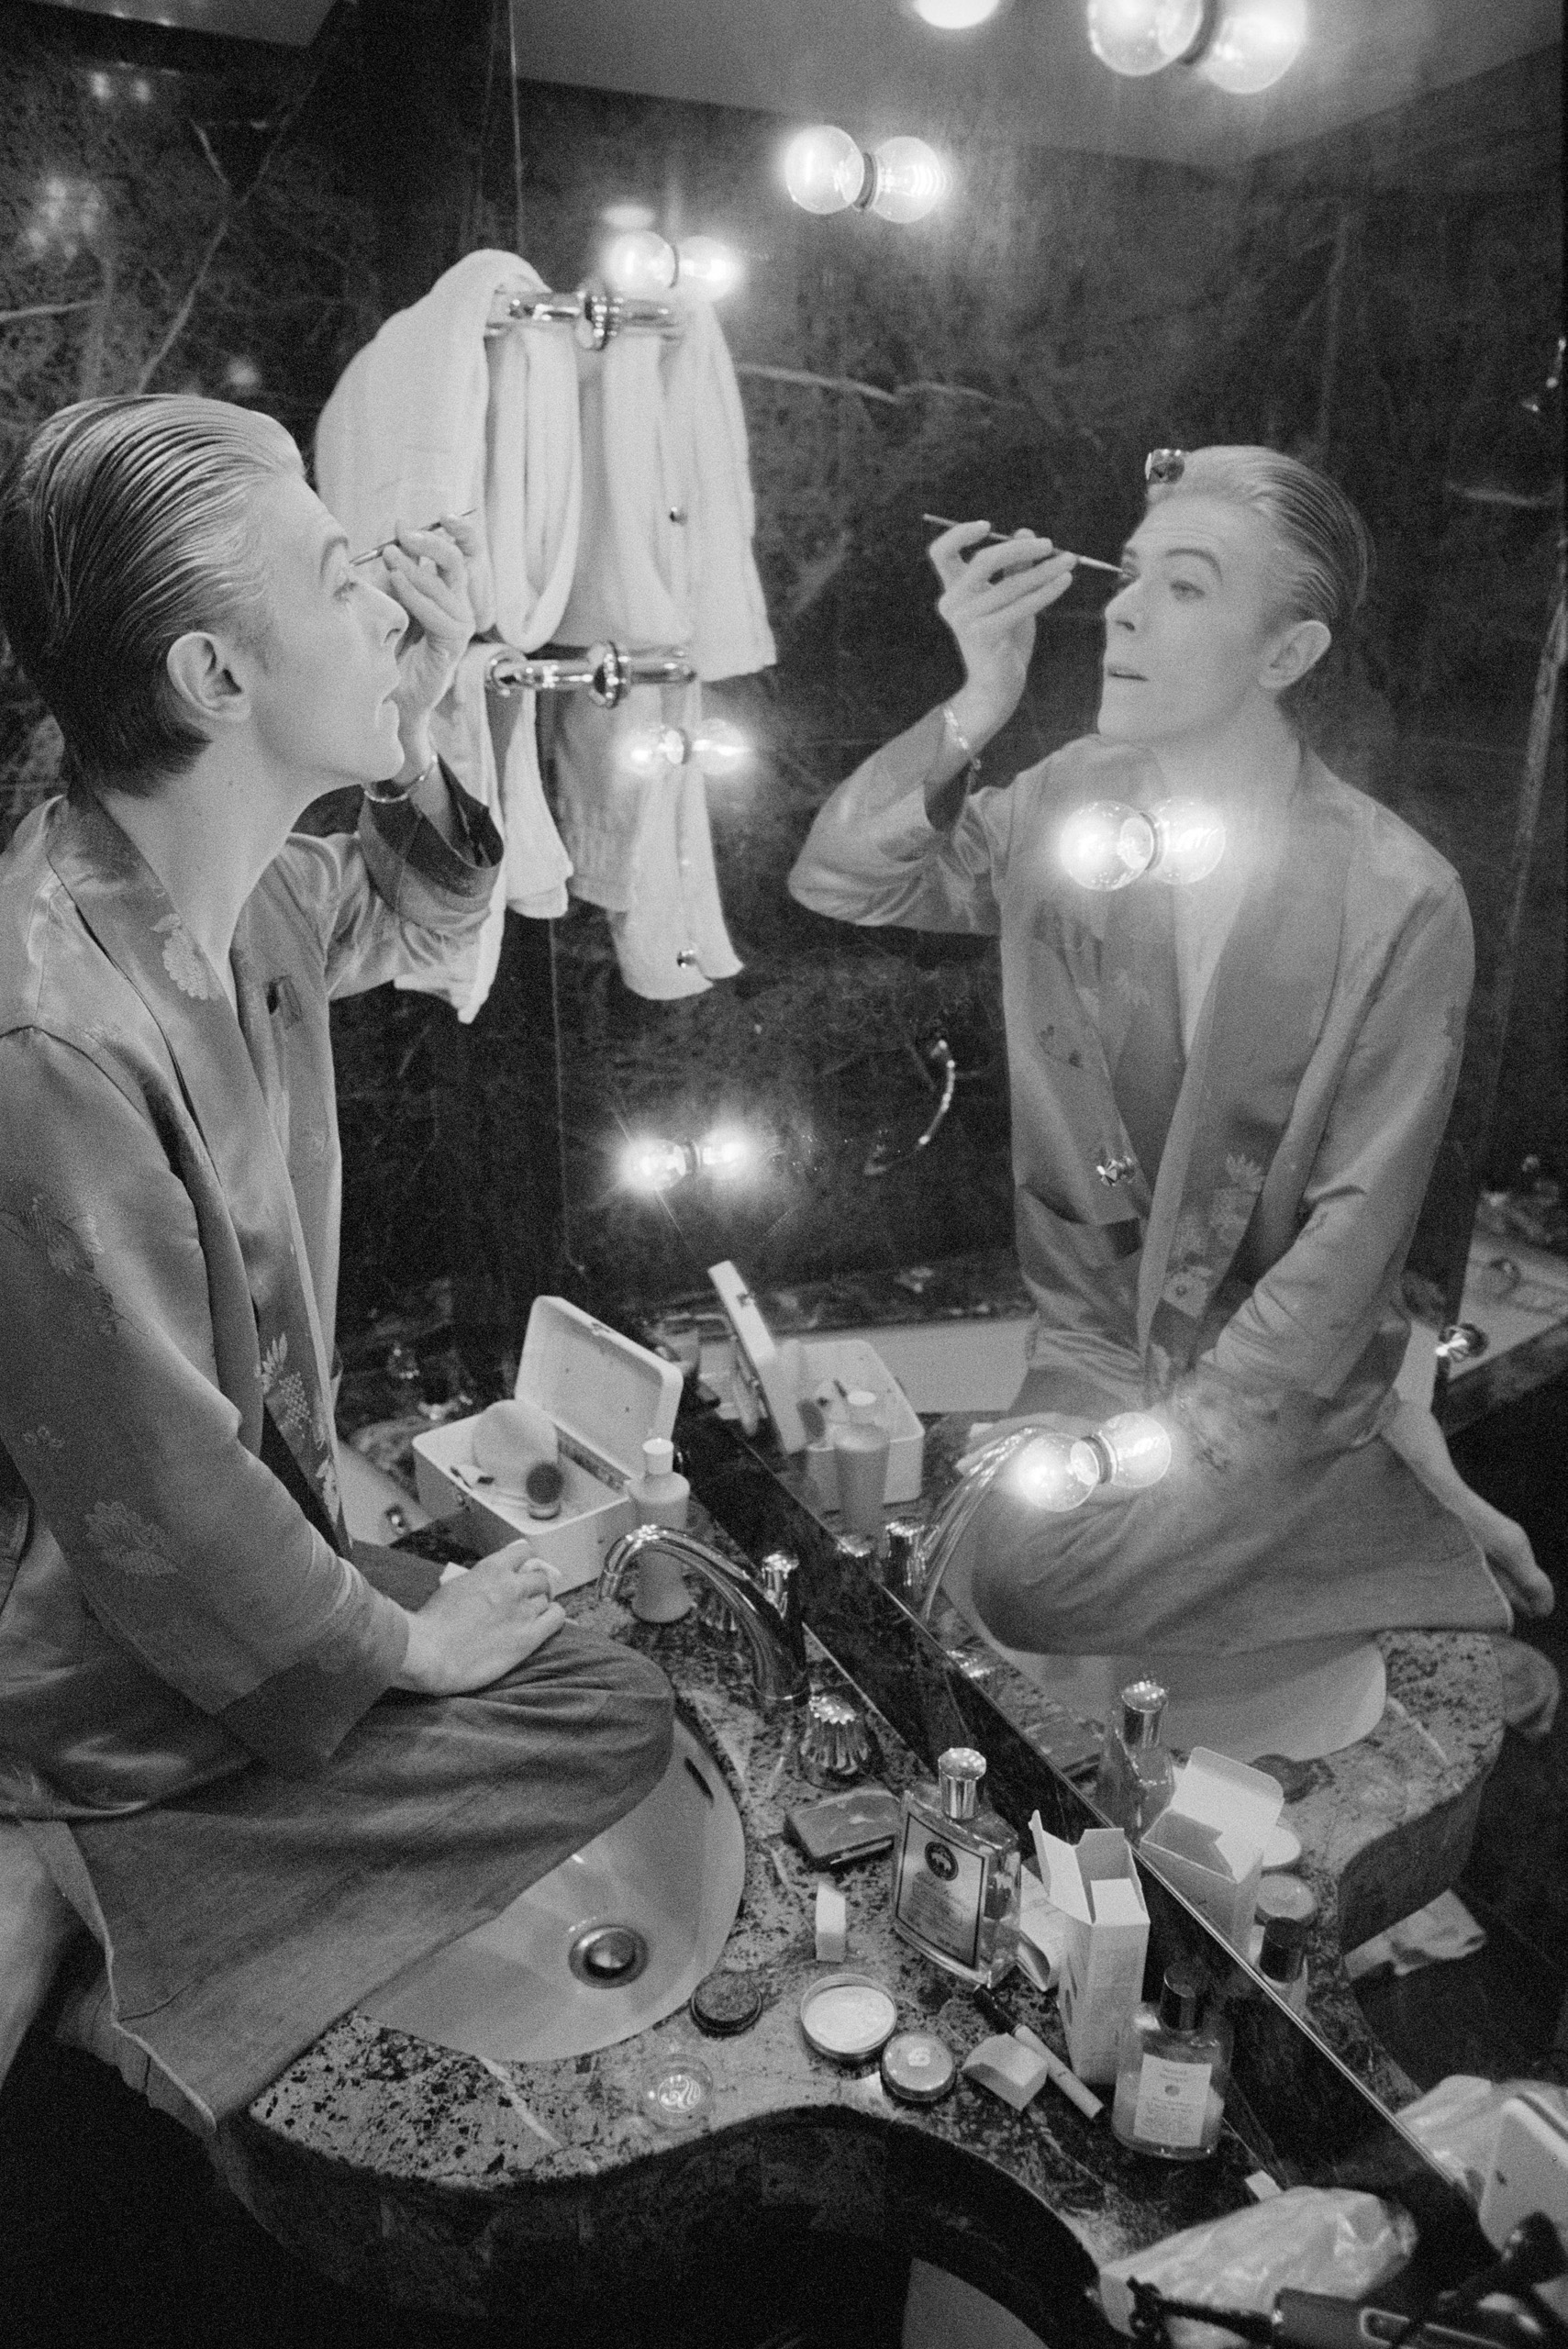 Bowie prepares his makeup in his Paris hotel suite prior to an impromptu photo. shoot.